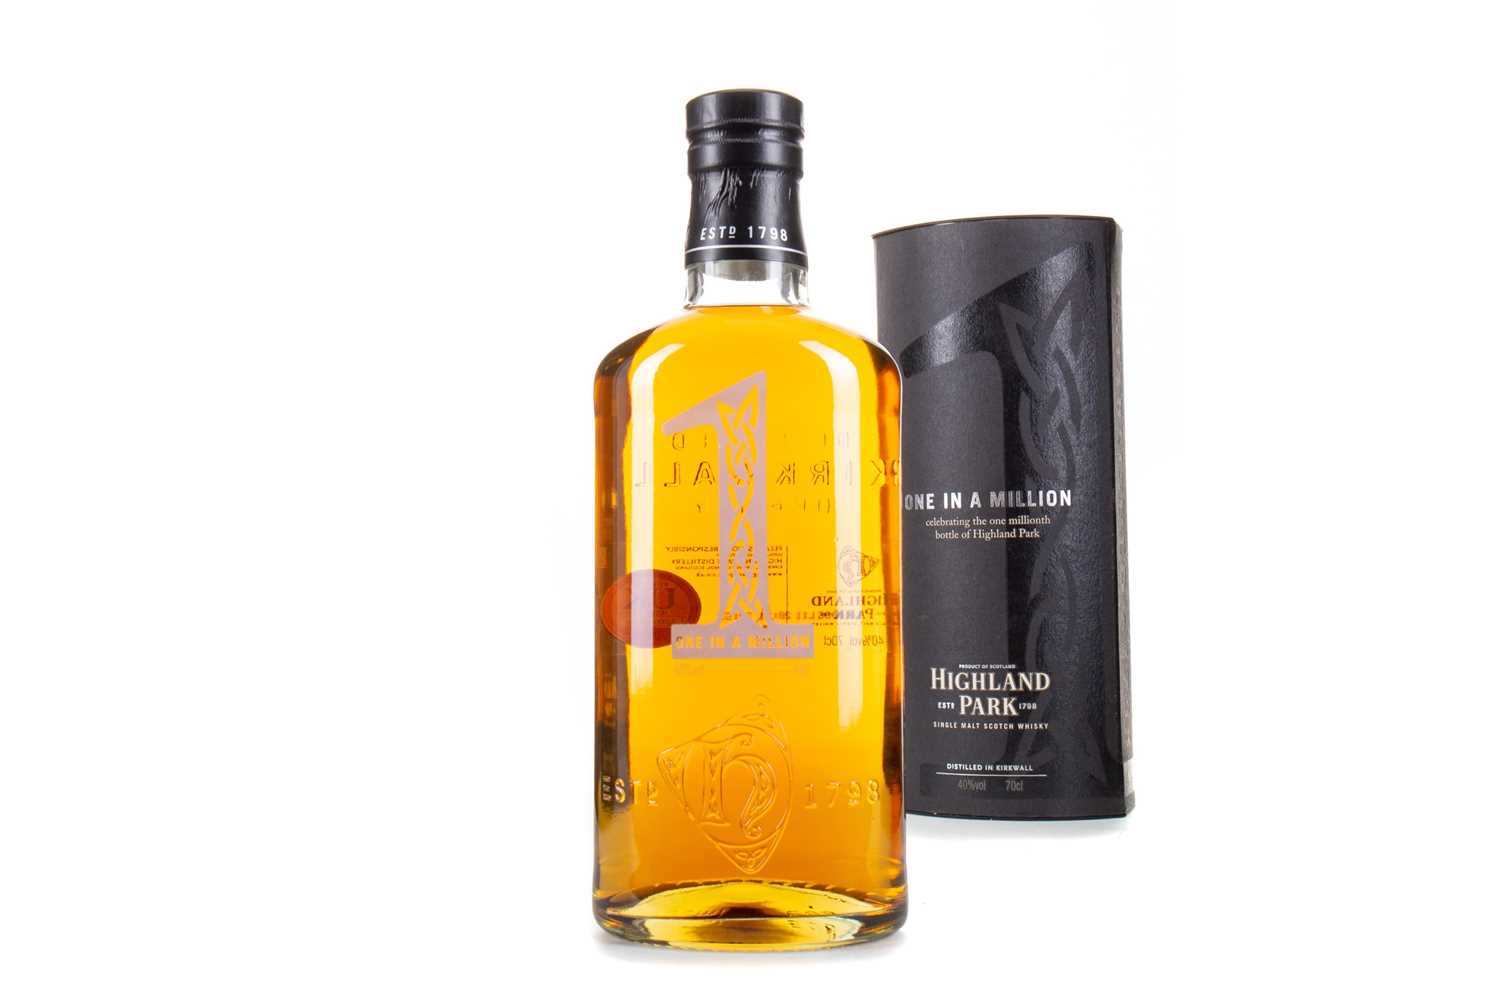 Lot 158 - HIGHLAND PARK 12 YEAR OLD 1 IN A MILLION